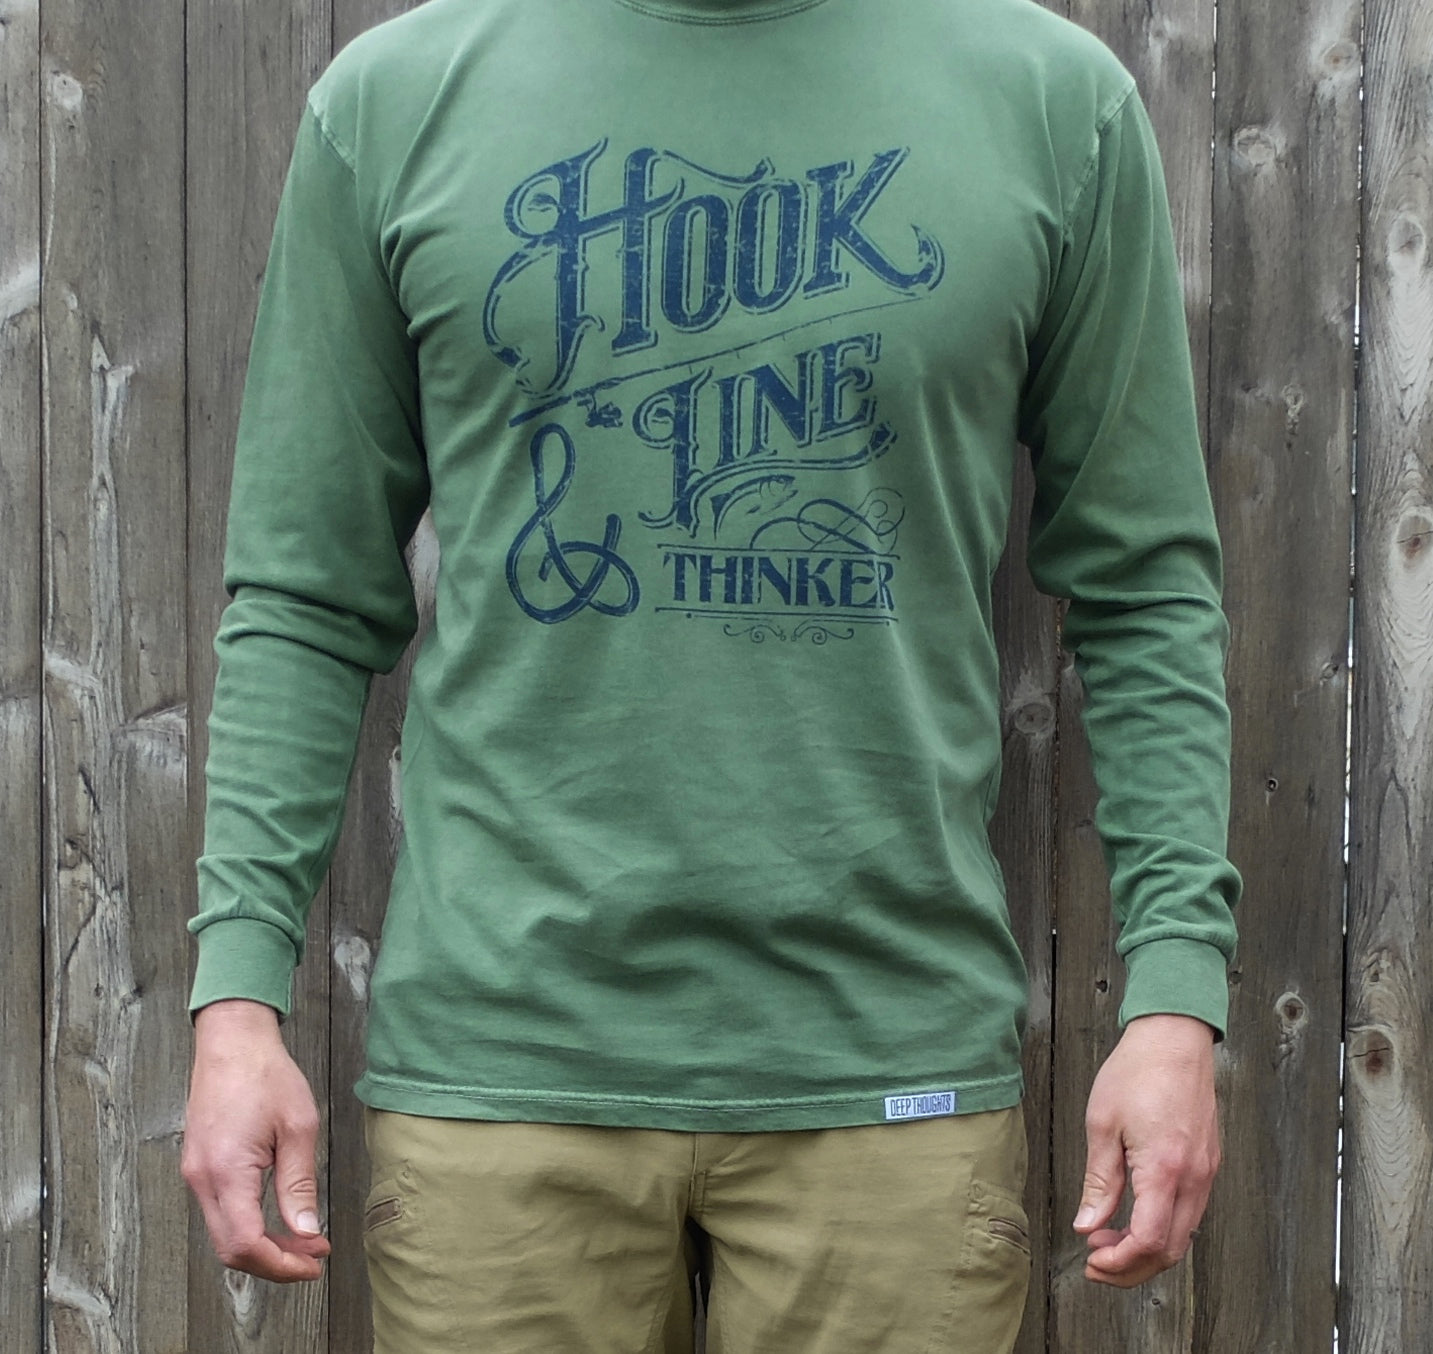 man wearing washed green long sleeve t-shirt with navy blue hook line and thinker graphic